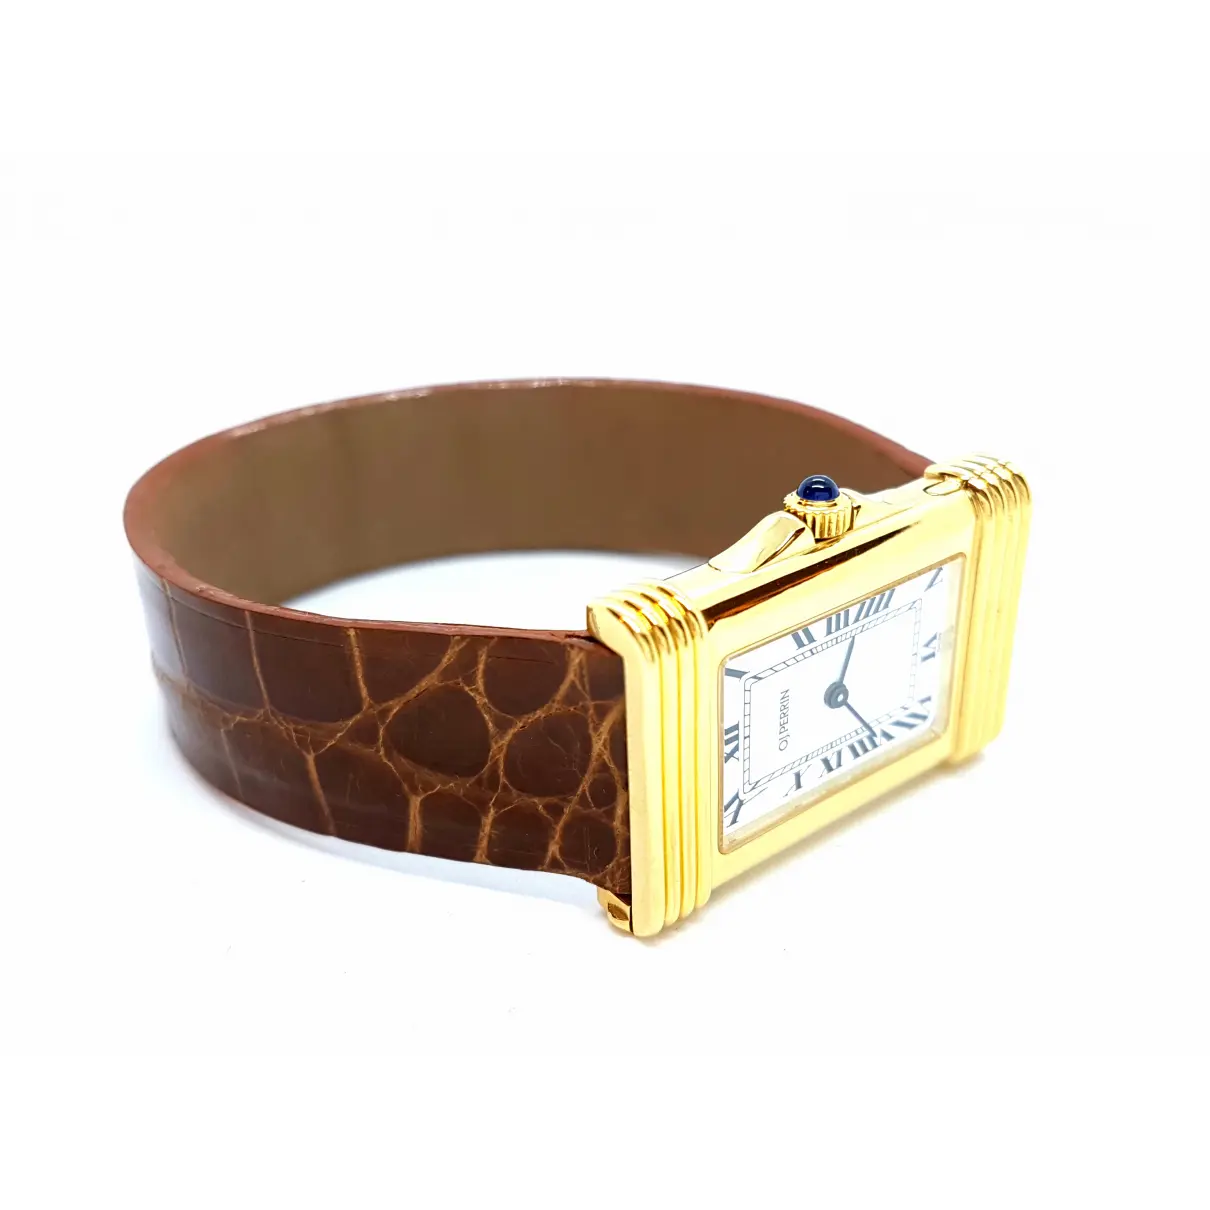 Buy O.J. Perrin Yellow gold watch online